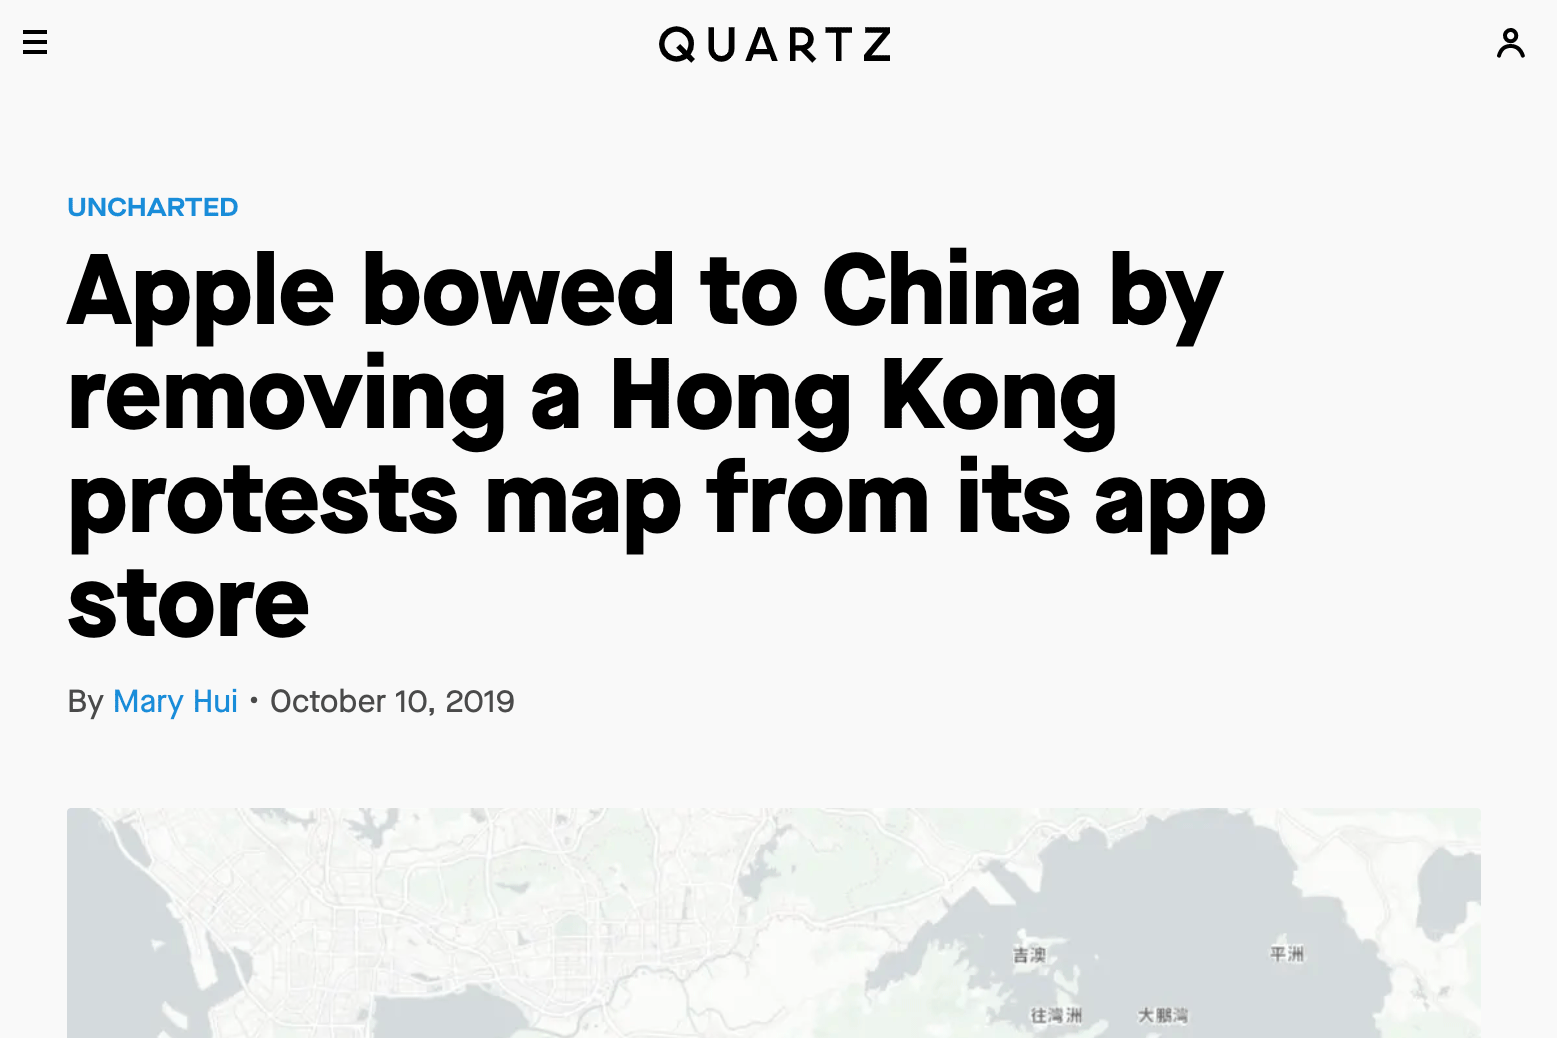 Quartz: Apple bowed to China by removing a Hong Kong protests map from its app store.